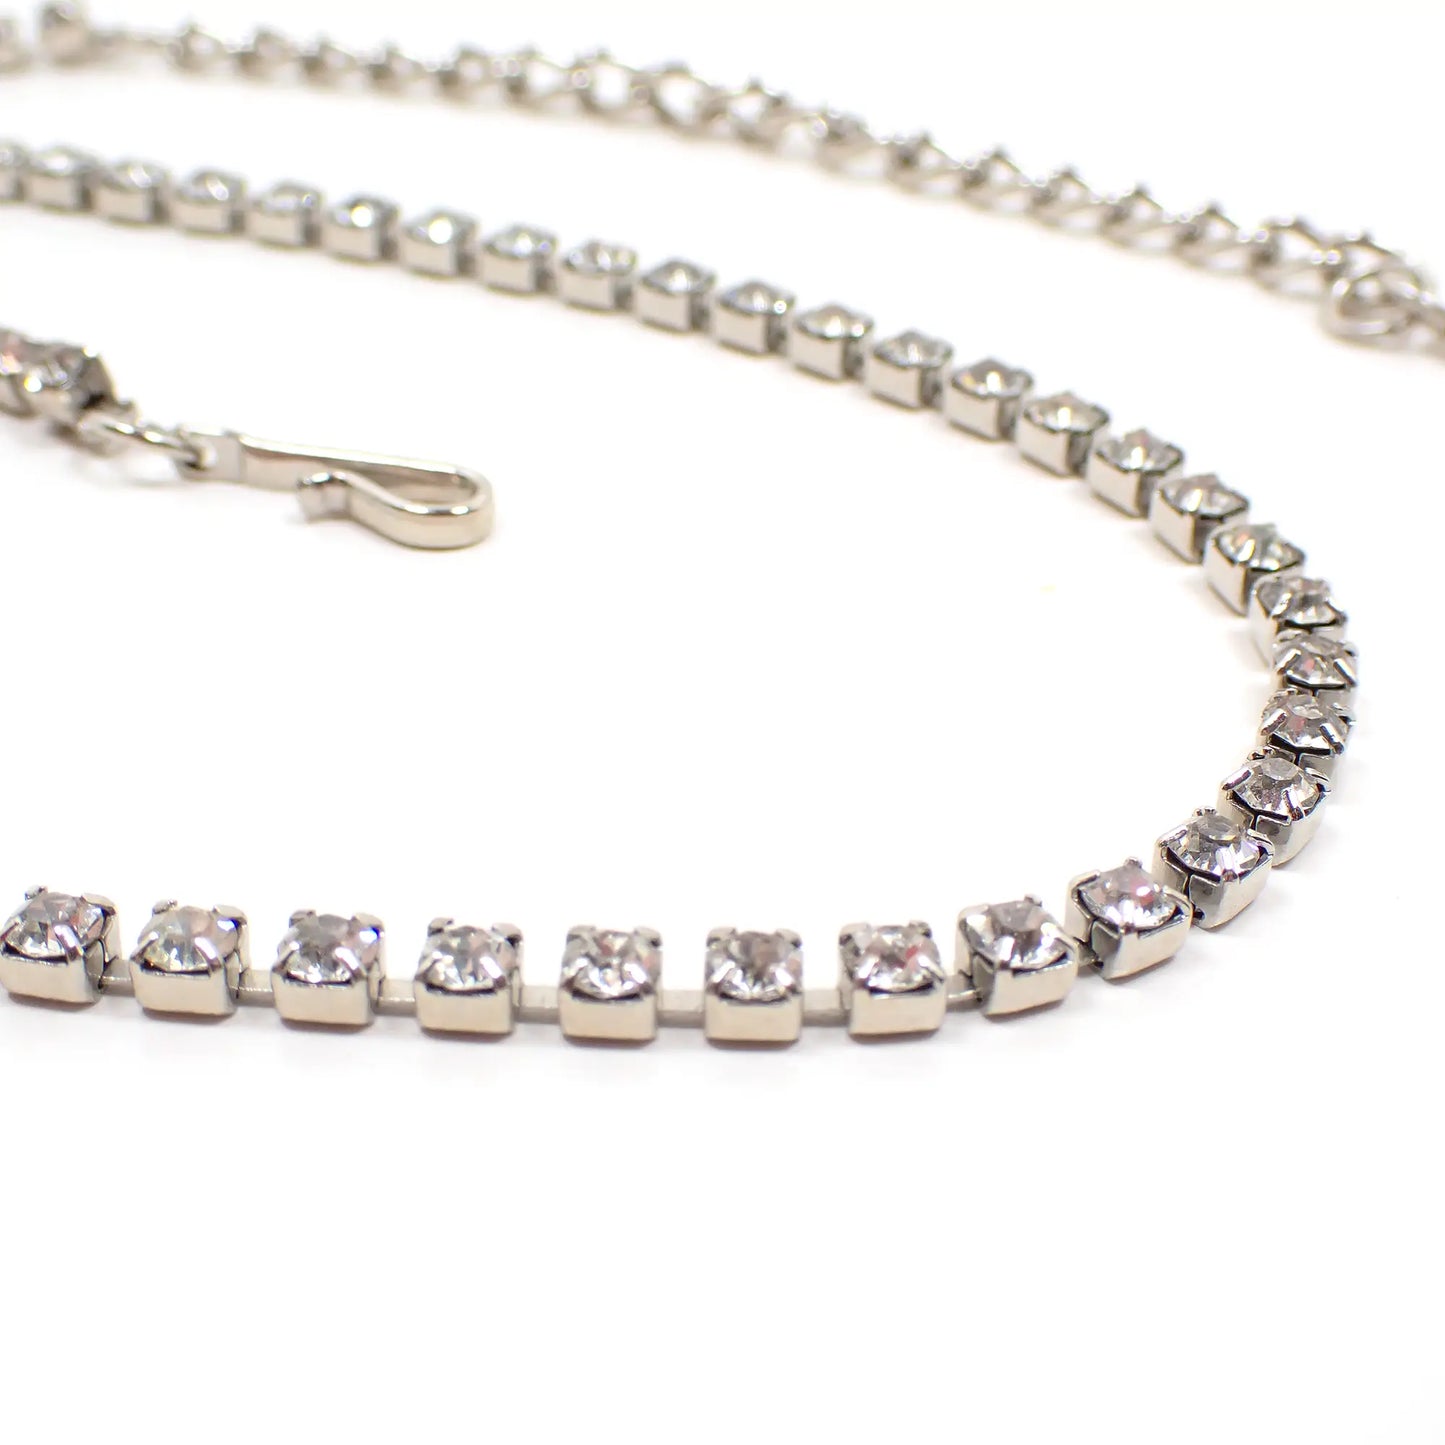 1950's Coro Rhinestone Vintage Choker Necklace with Hook Clasp